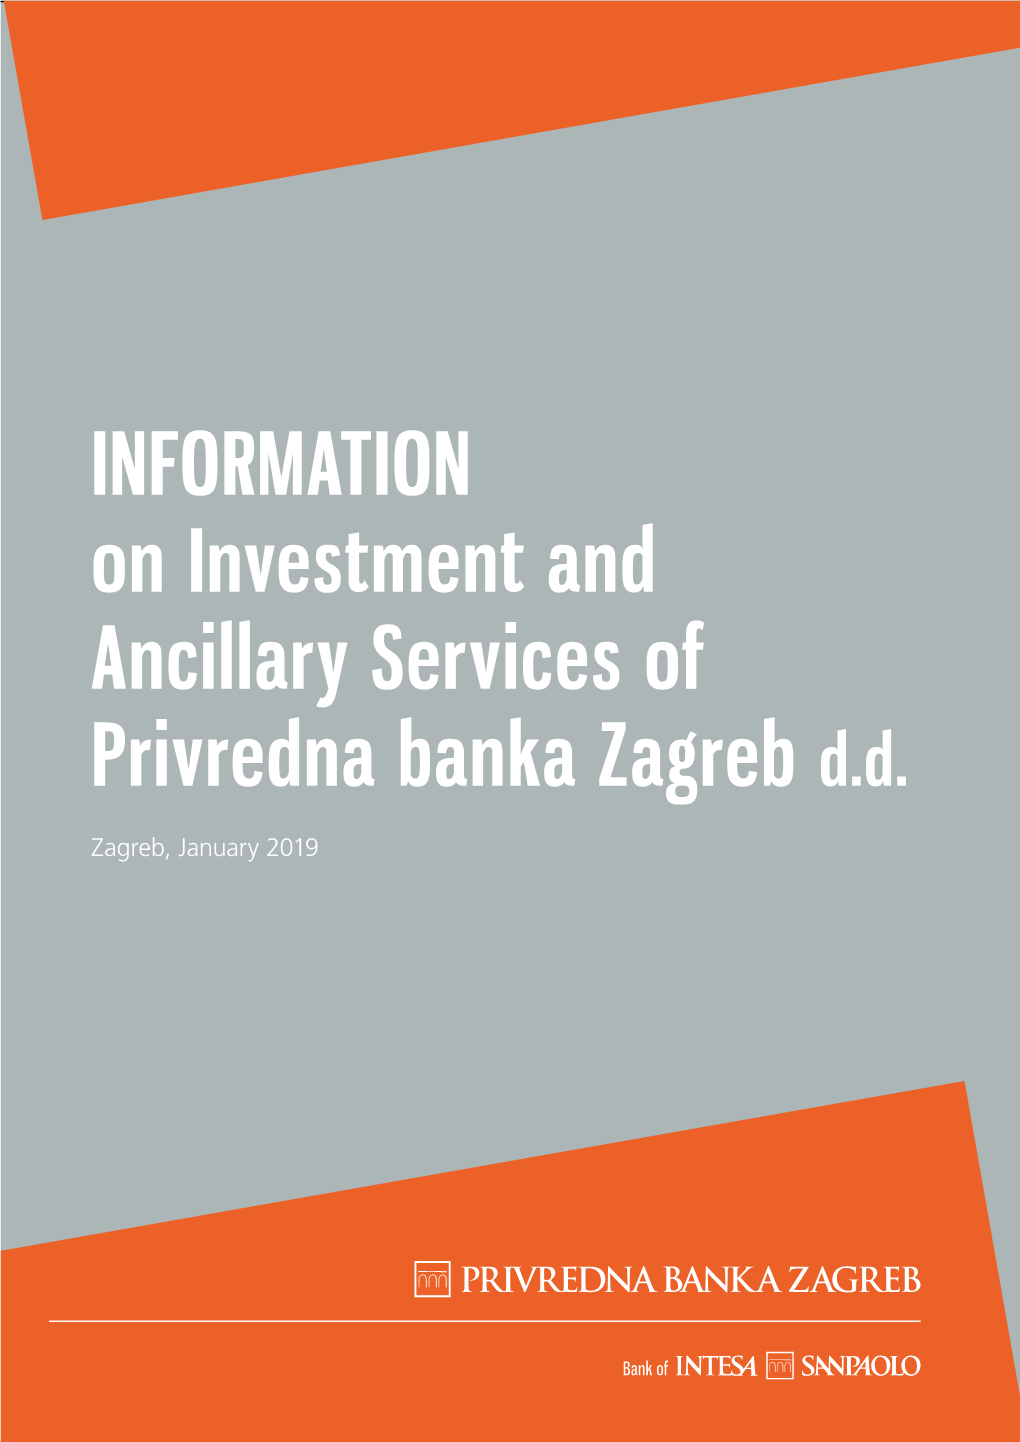 INFORMATION on Investment and Ancillary Services of Privredna Banka Zagreb D.D